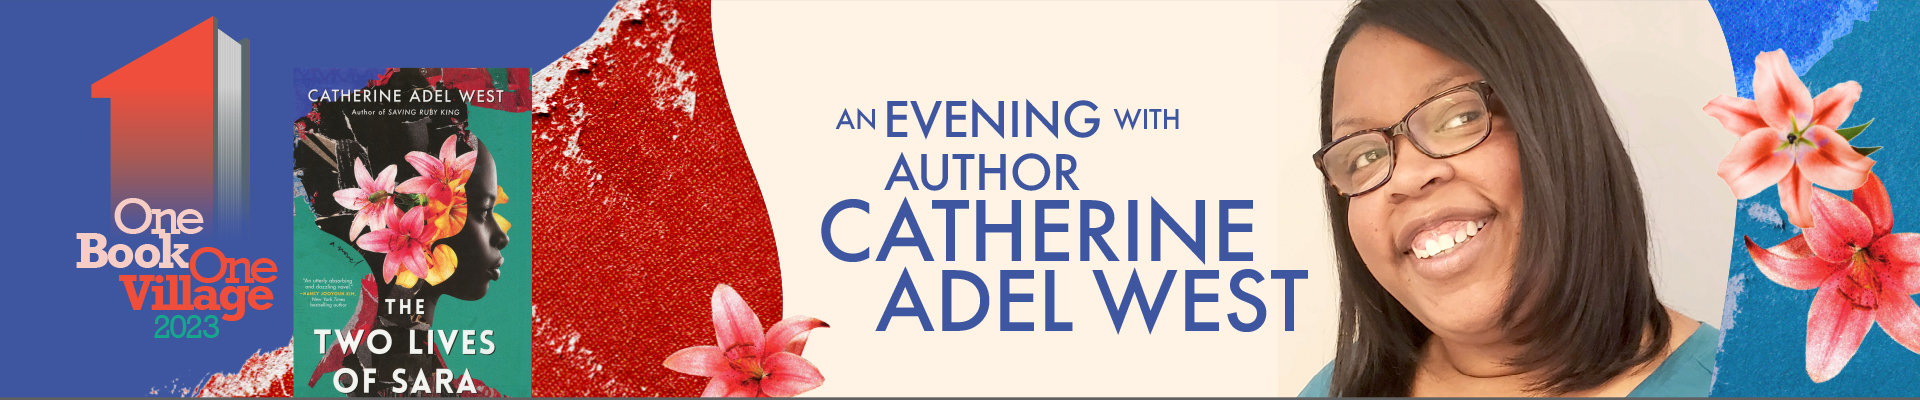 An Evening with Catherine Adel West